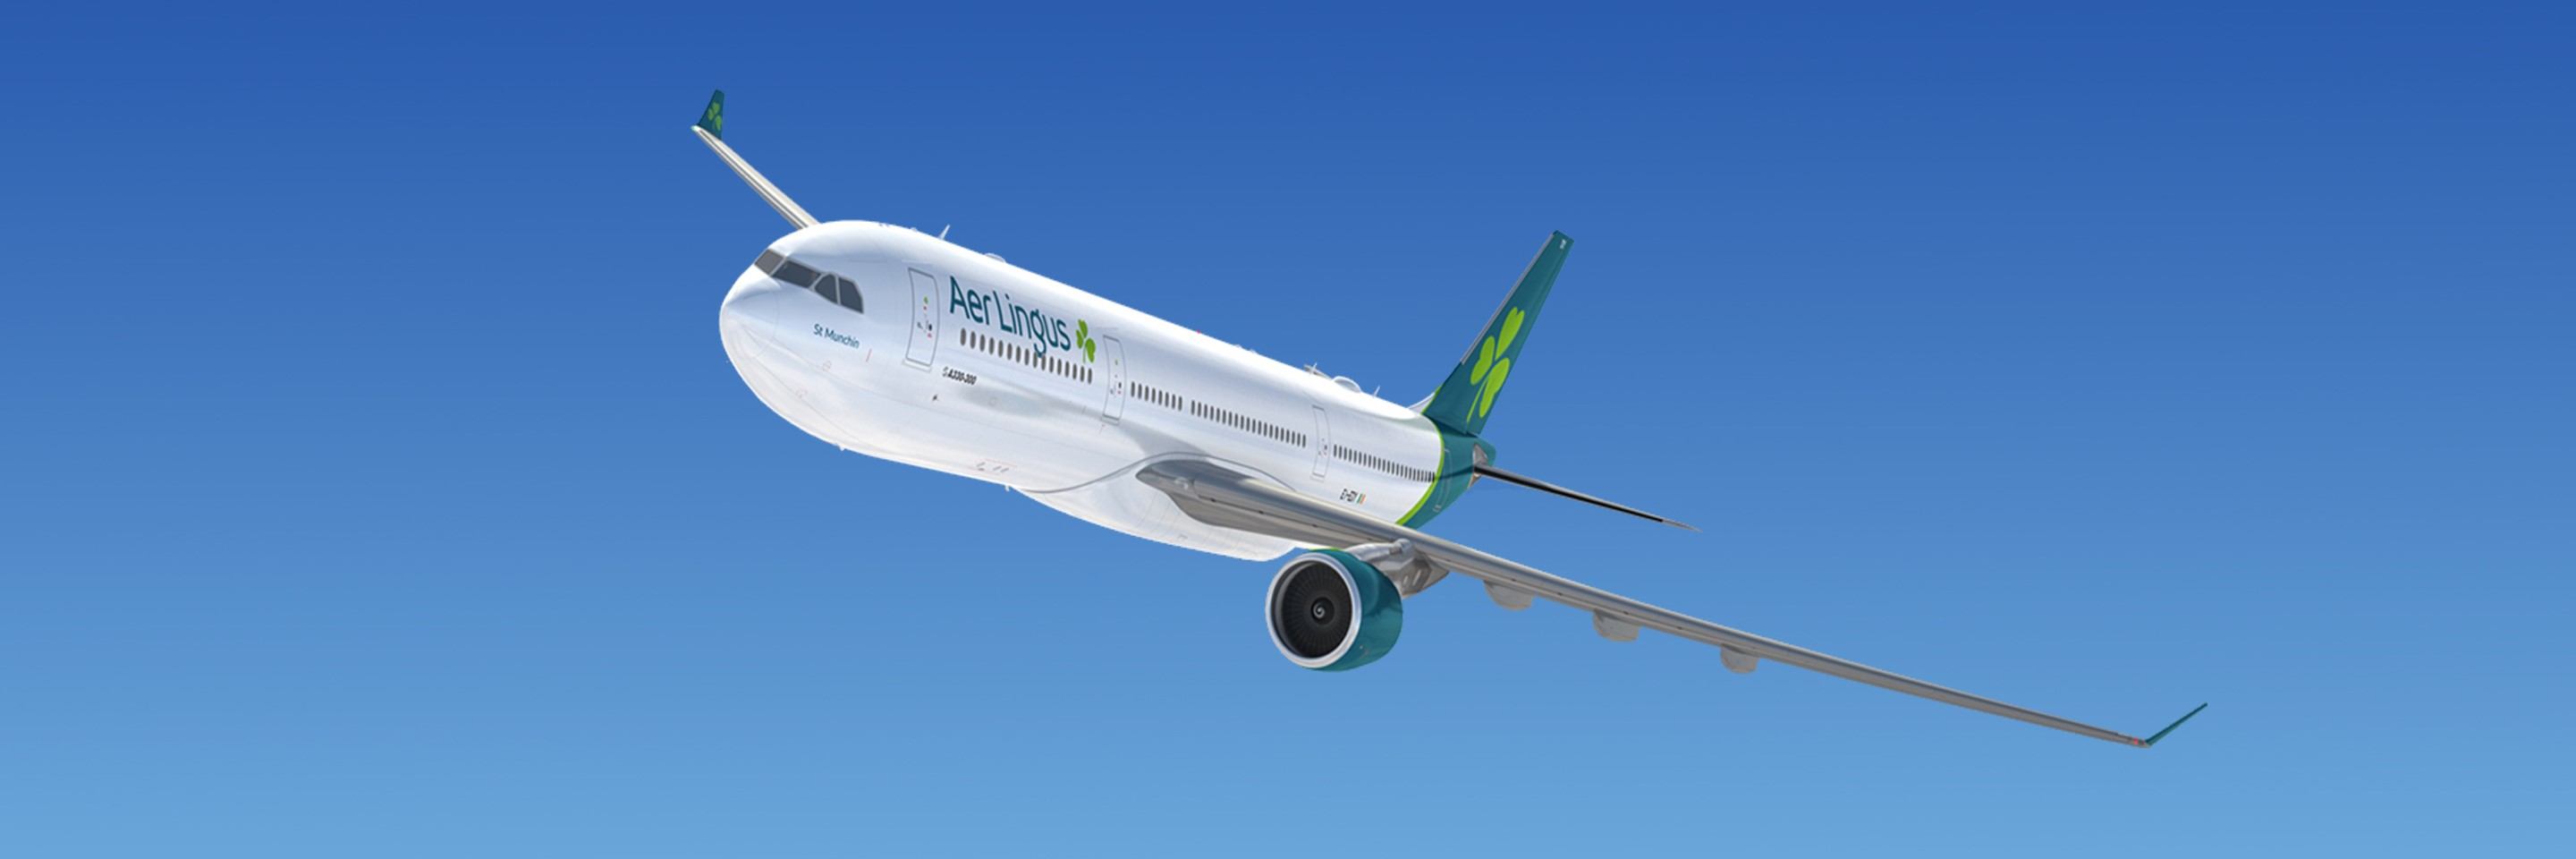 Book cheap flights with Aer Lingus to 